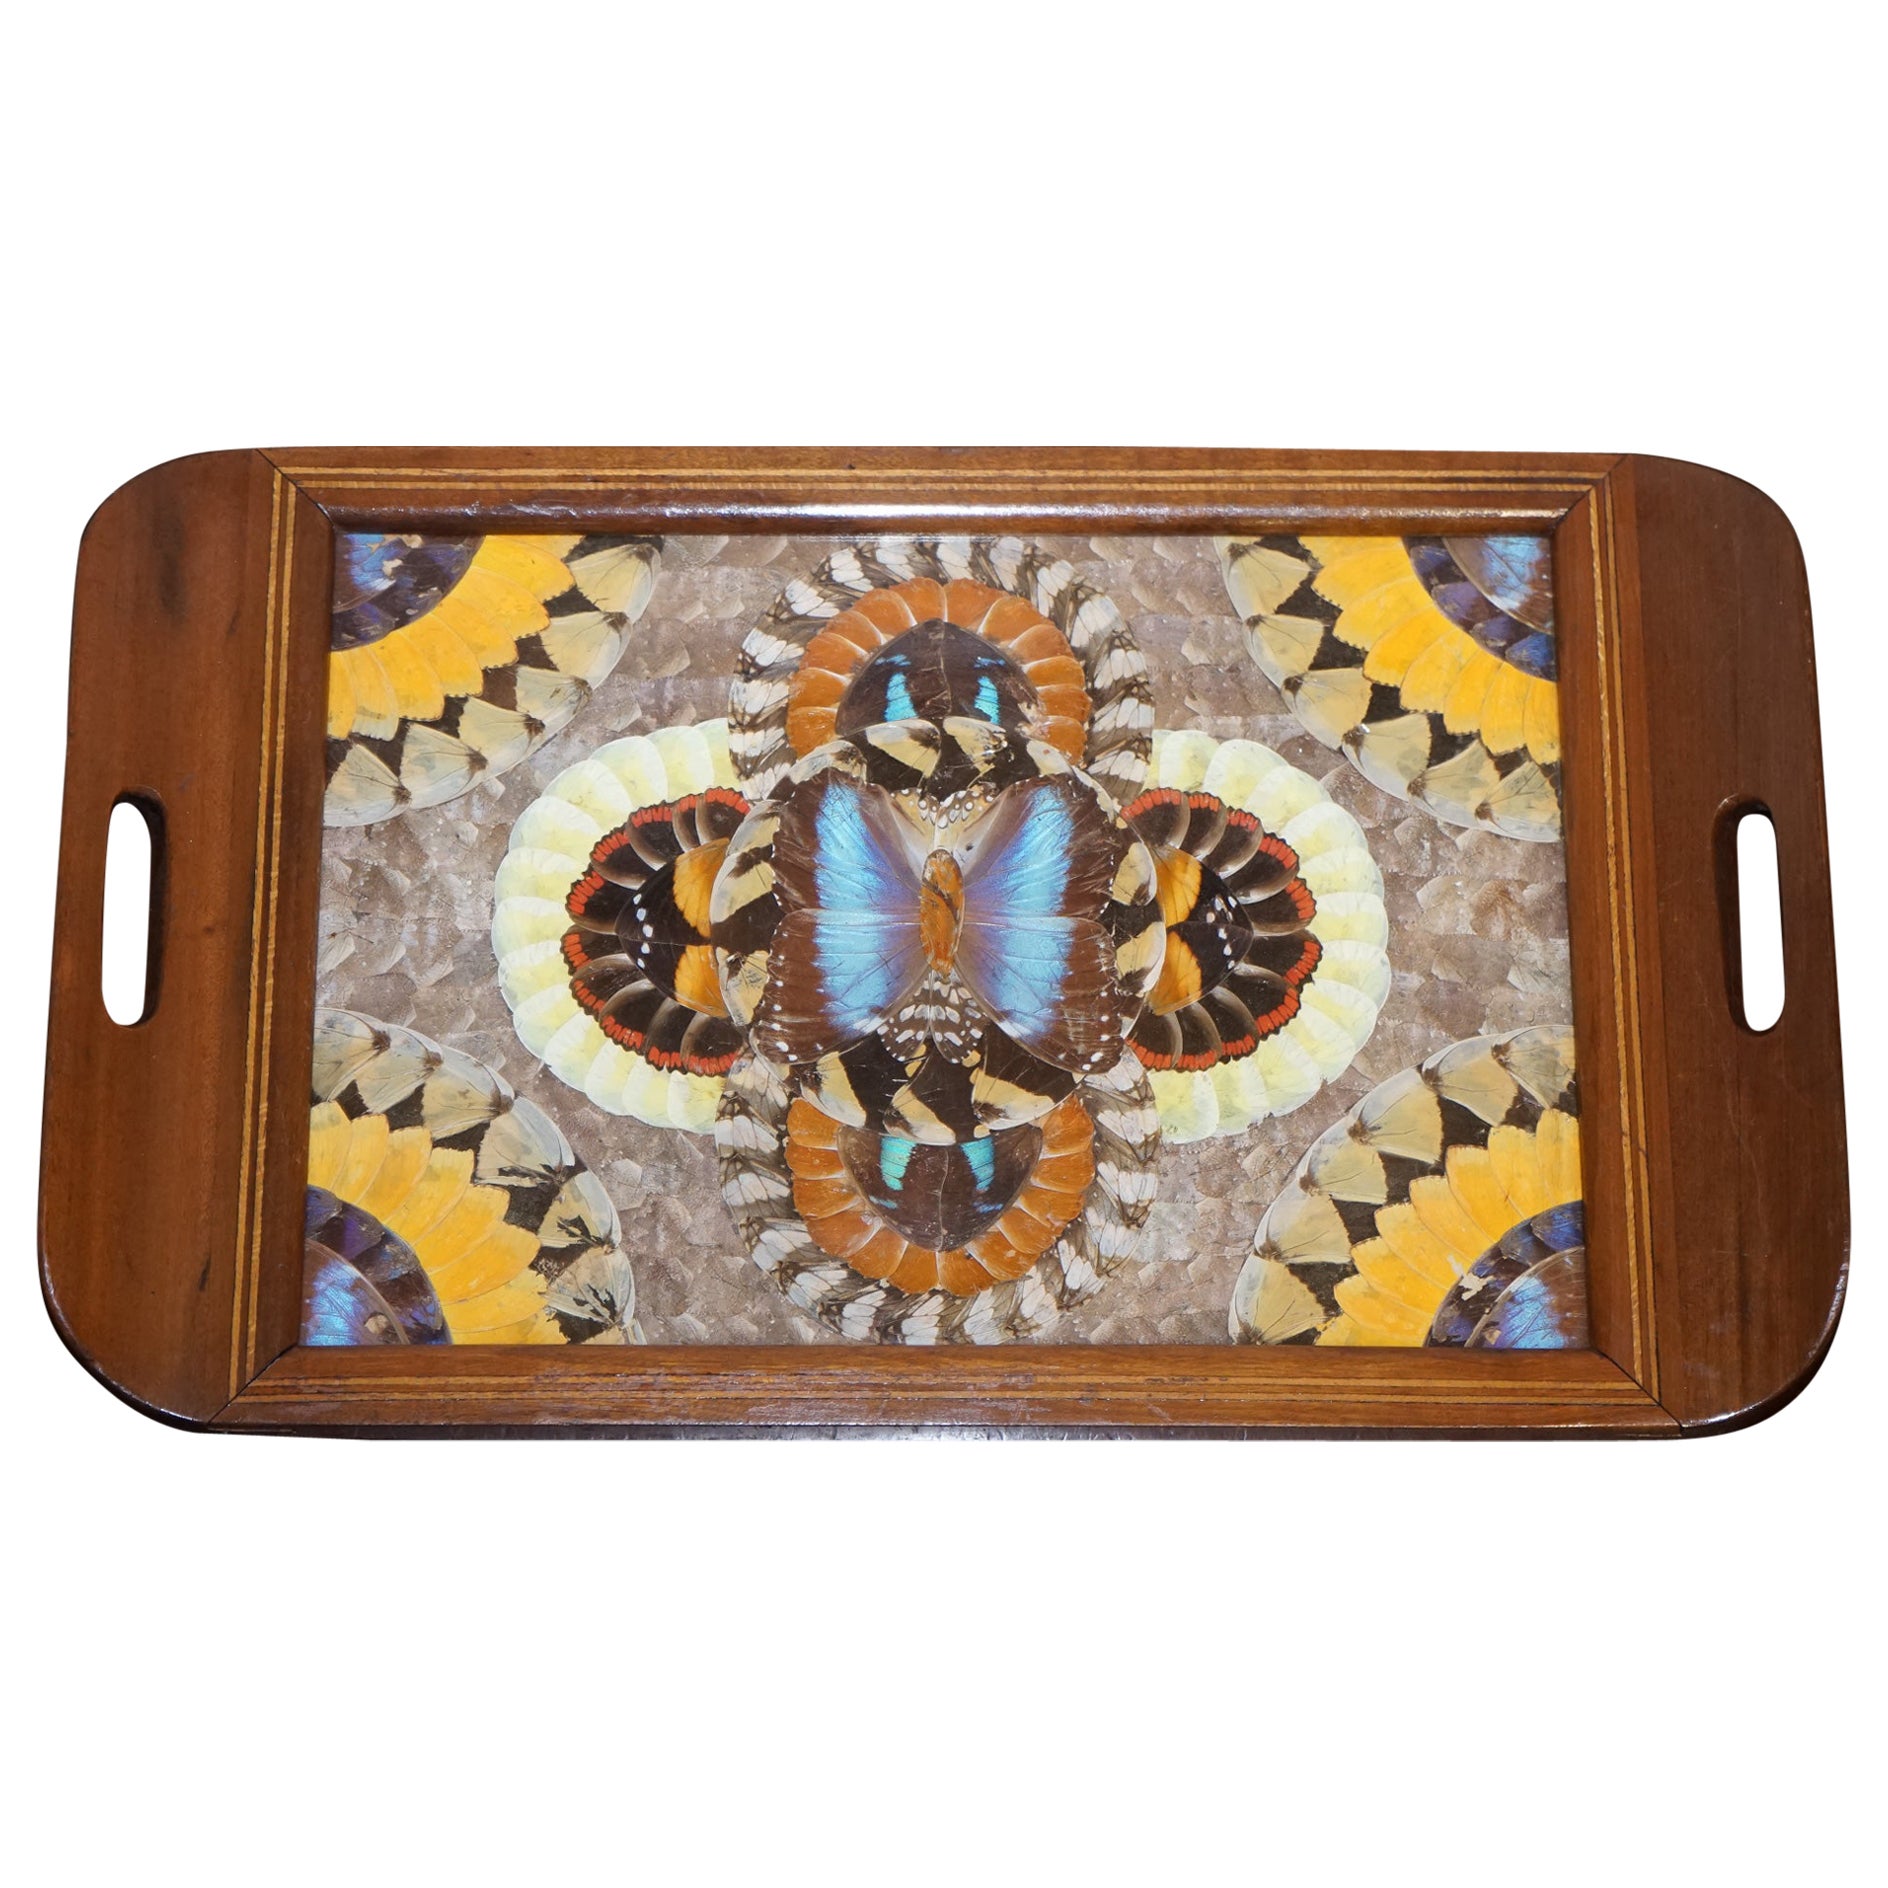 Vintage Brazilian Inlaid Wood Tray with Real Morpho Butterfly Wings